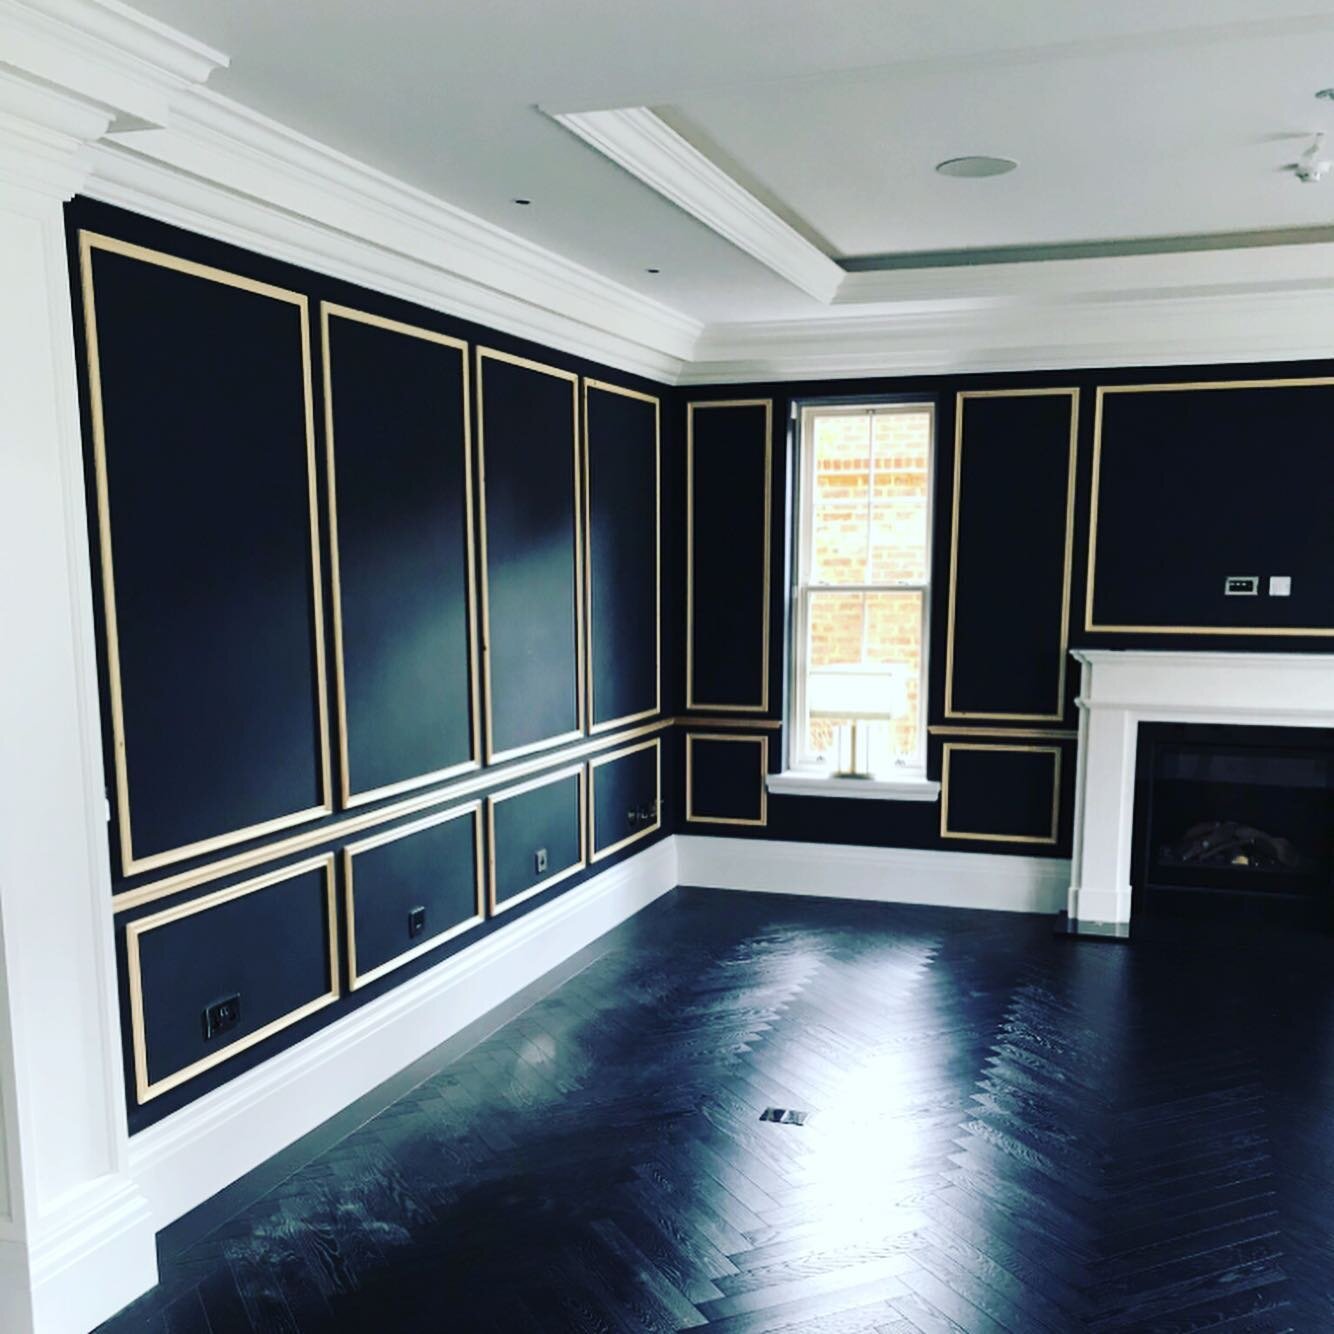 It&rsquo;s all in the detail&hellip;&hellip;
Wall panelling really brings a room to life! Here is some wall panelling installed last year for a client. There&rsquo;s so many different layouts and combinations you can do, this is a personal favourite 